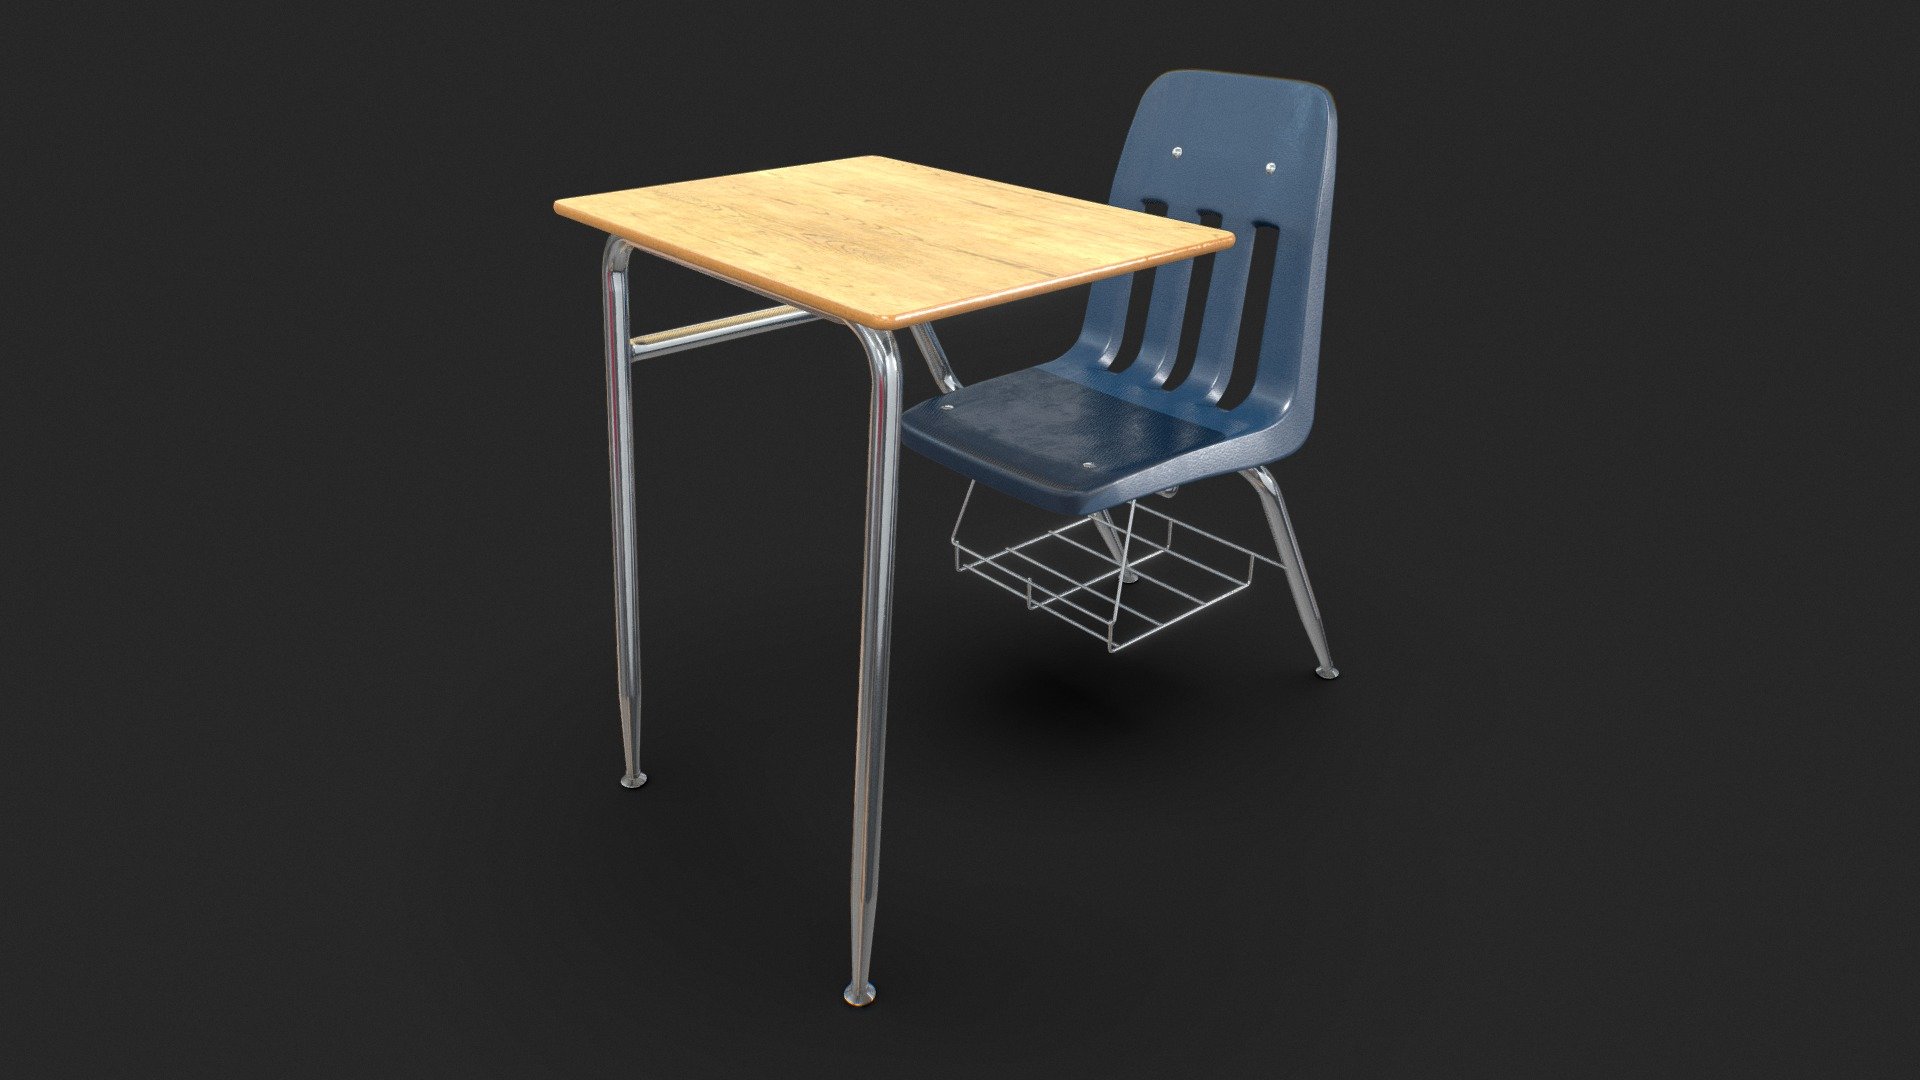 Here is a school chair that I have modeled for Adobe Stock. For submission I have the textures at 4K and I was also only allowed to use only quads (I could use tris, but only if necessary). The model was to be used inside of Adobe Dimension.

Quads: 16,758
Tris: 33,516

This is the first model using the school chair, for this version I decided to make a desk with a book tray underneath.

I modeled using 3ds Max and textured using Substance Painter 3d model